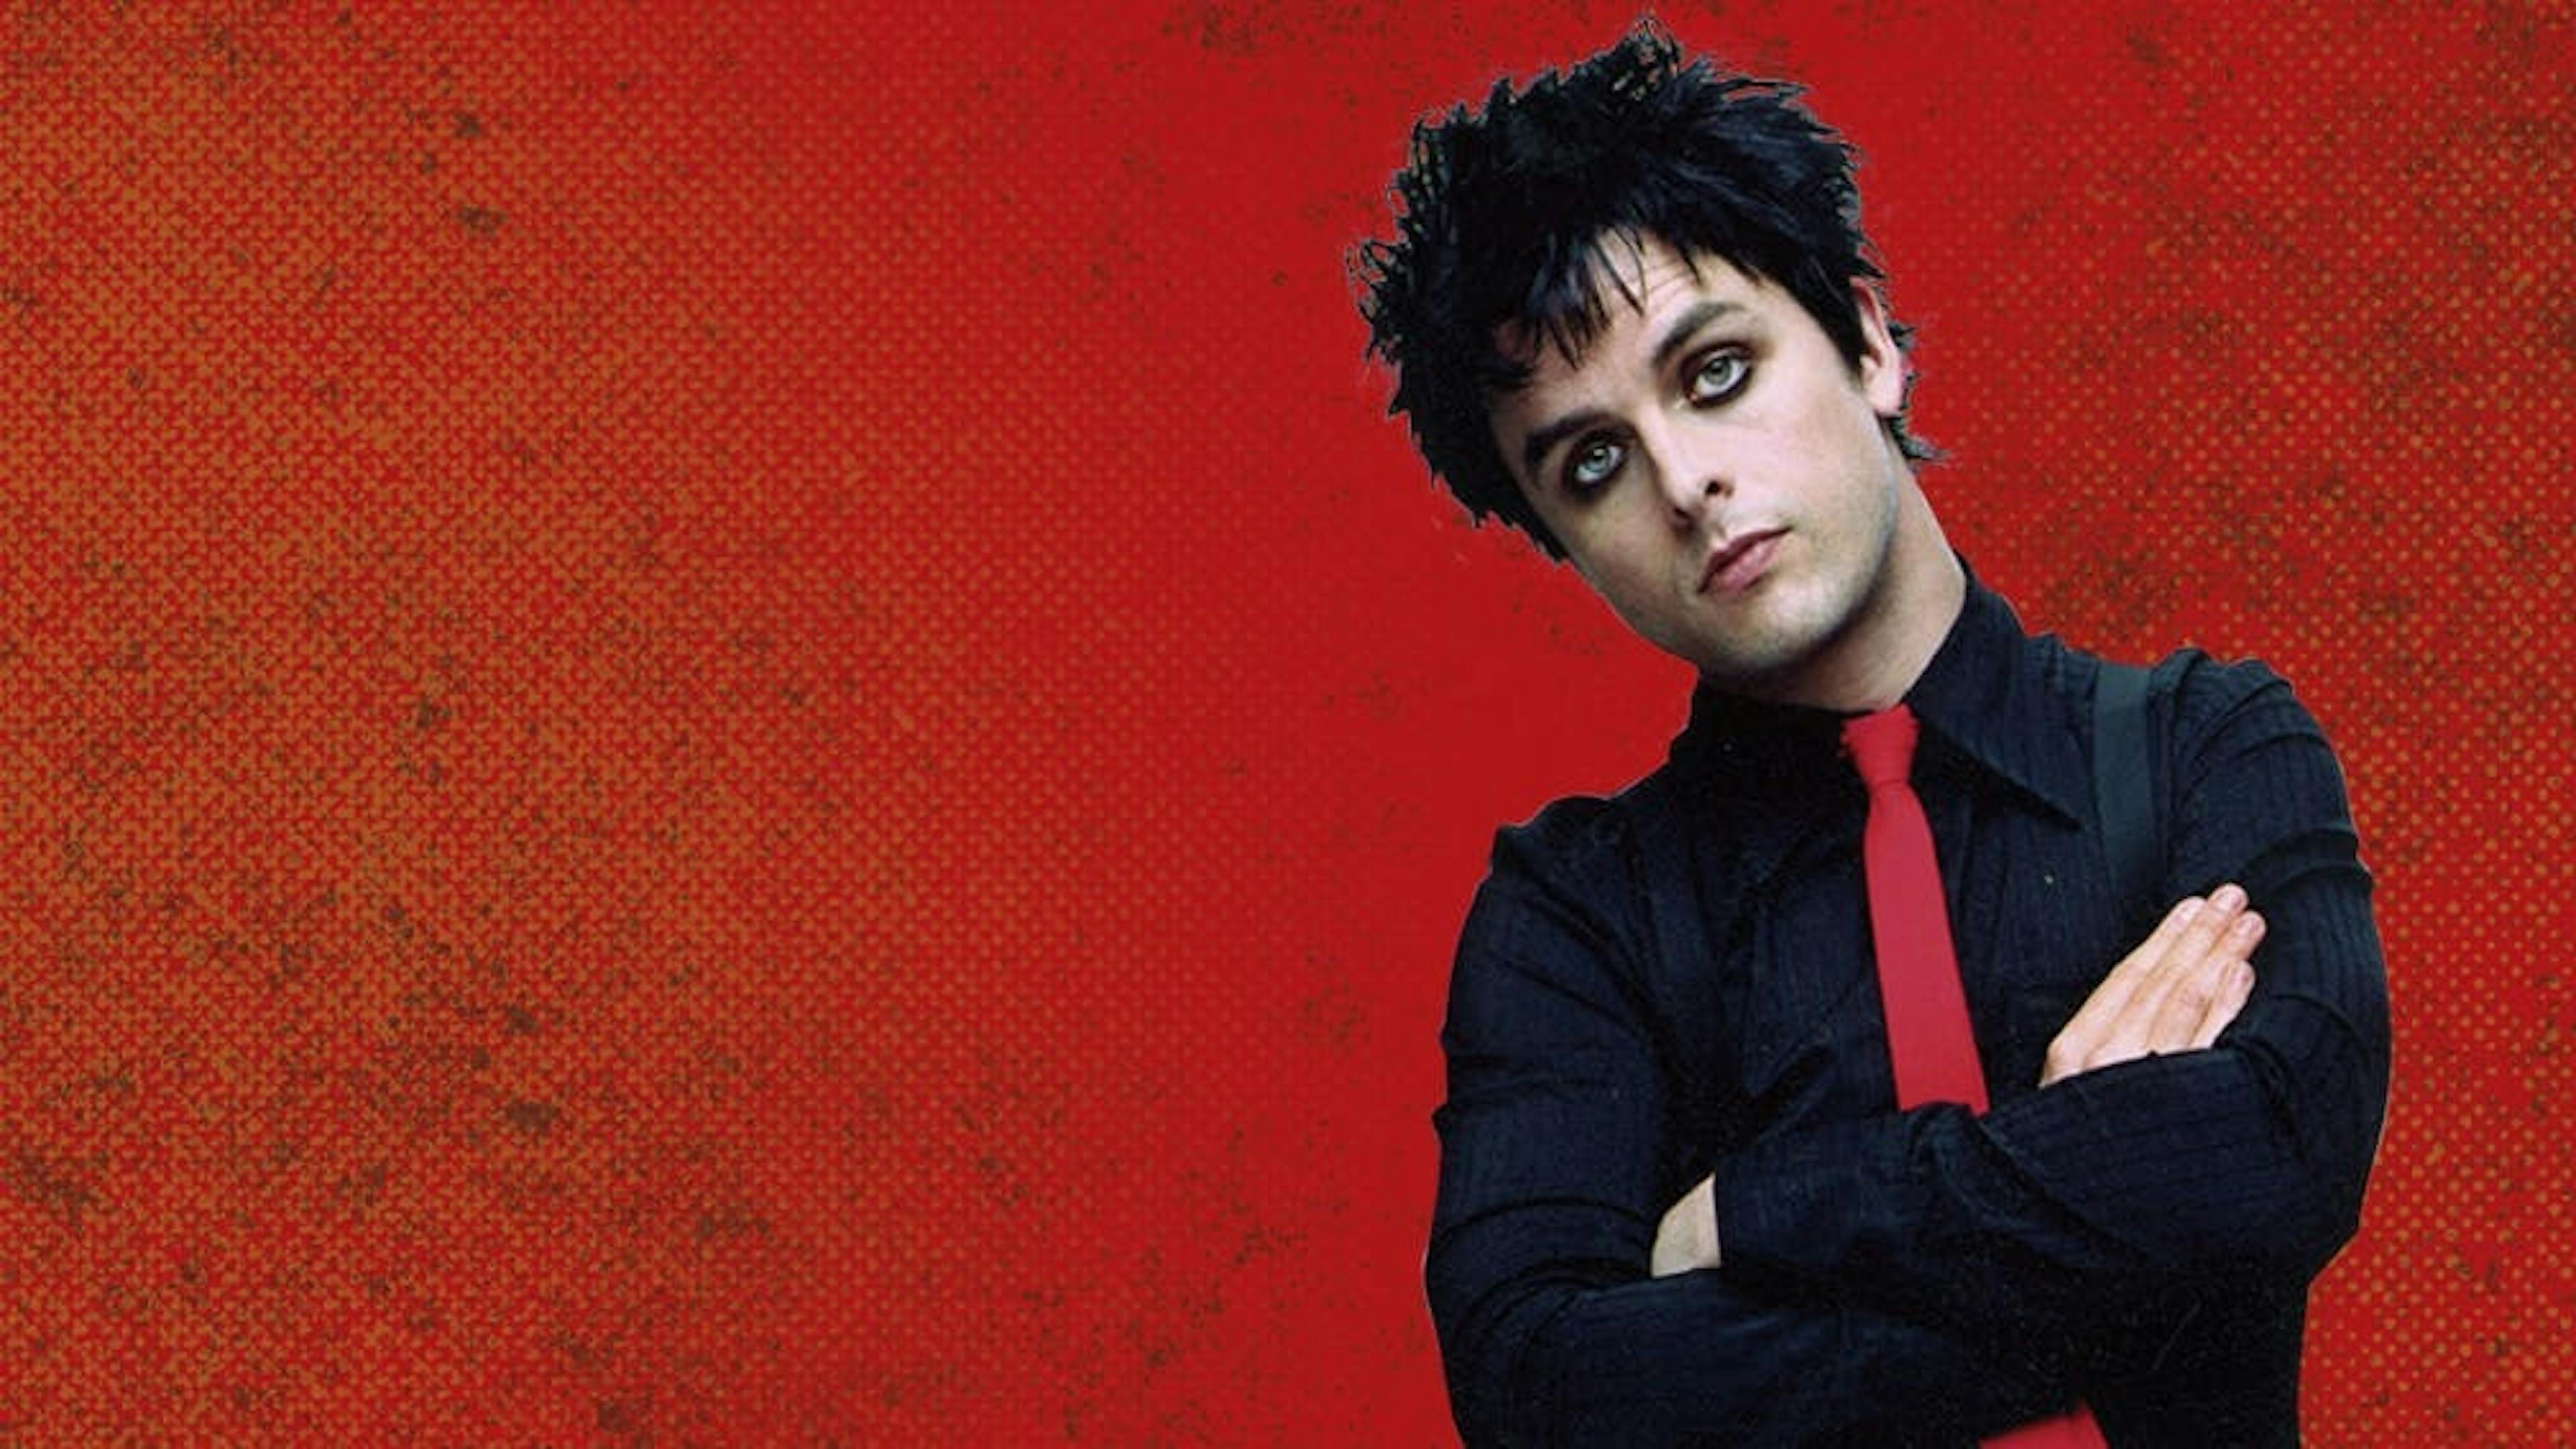 20 things you probably didn’t know about Billie Joe Armstrong